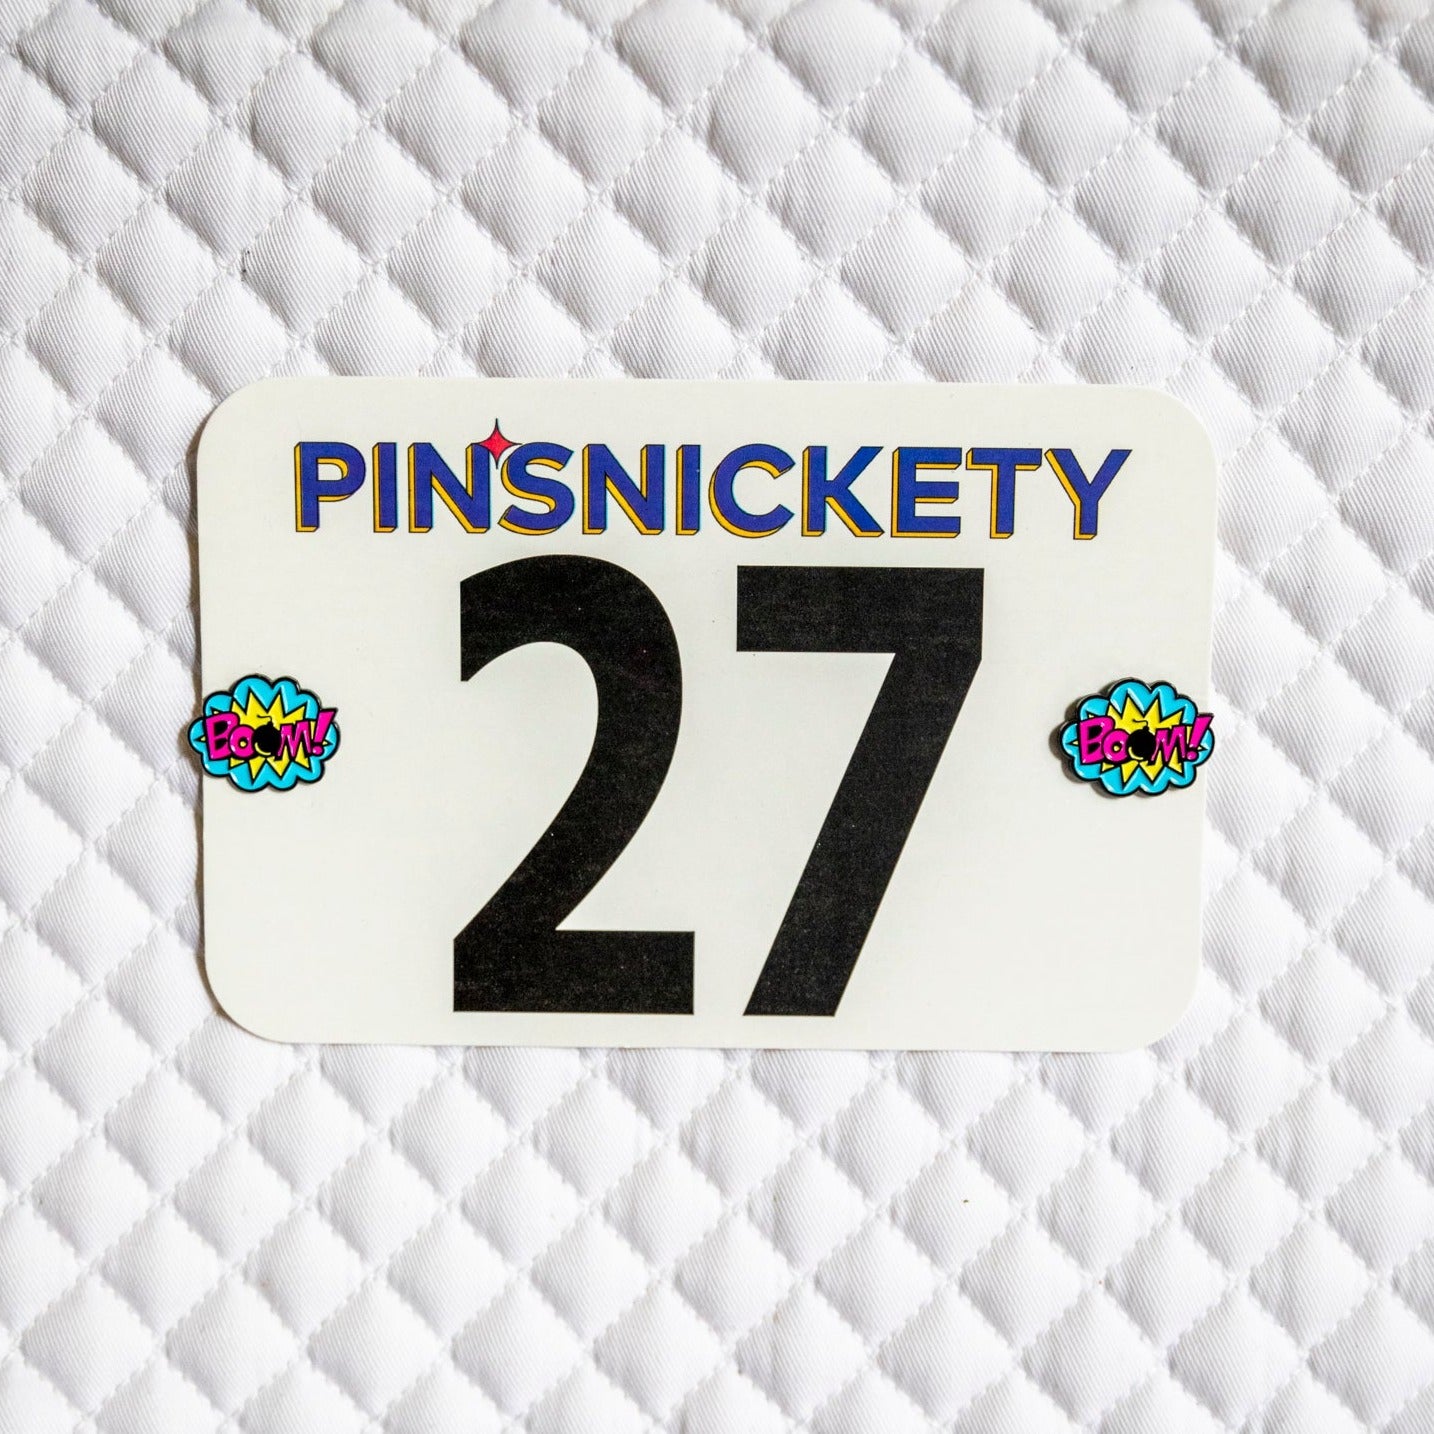 Pinsnickety BOOM! horse show number pins on a saddle pad.